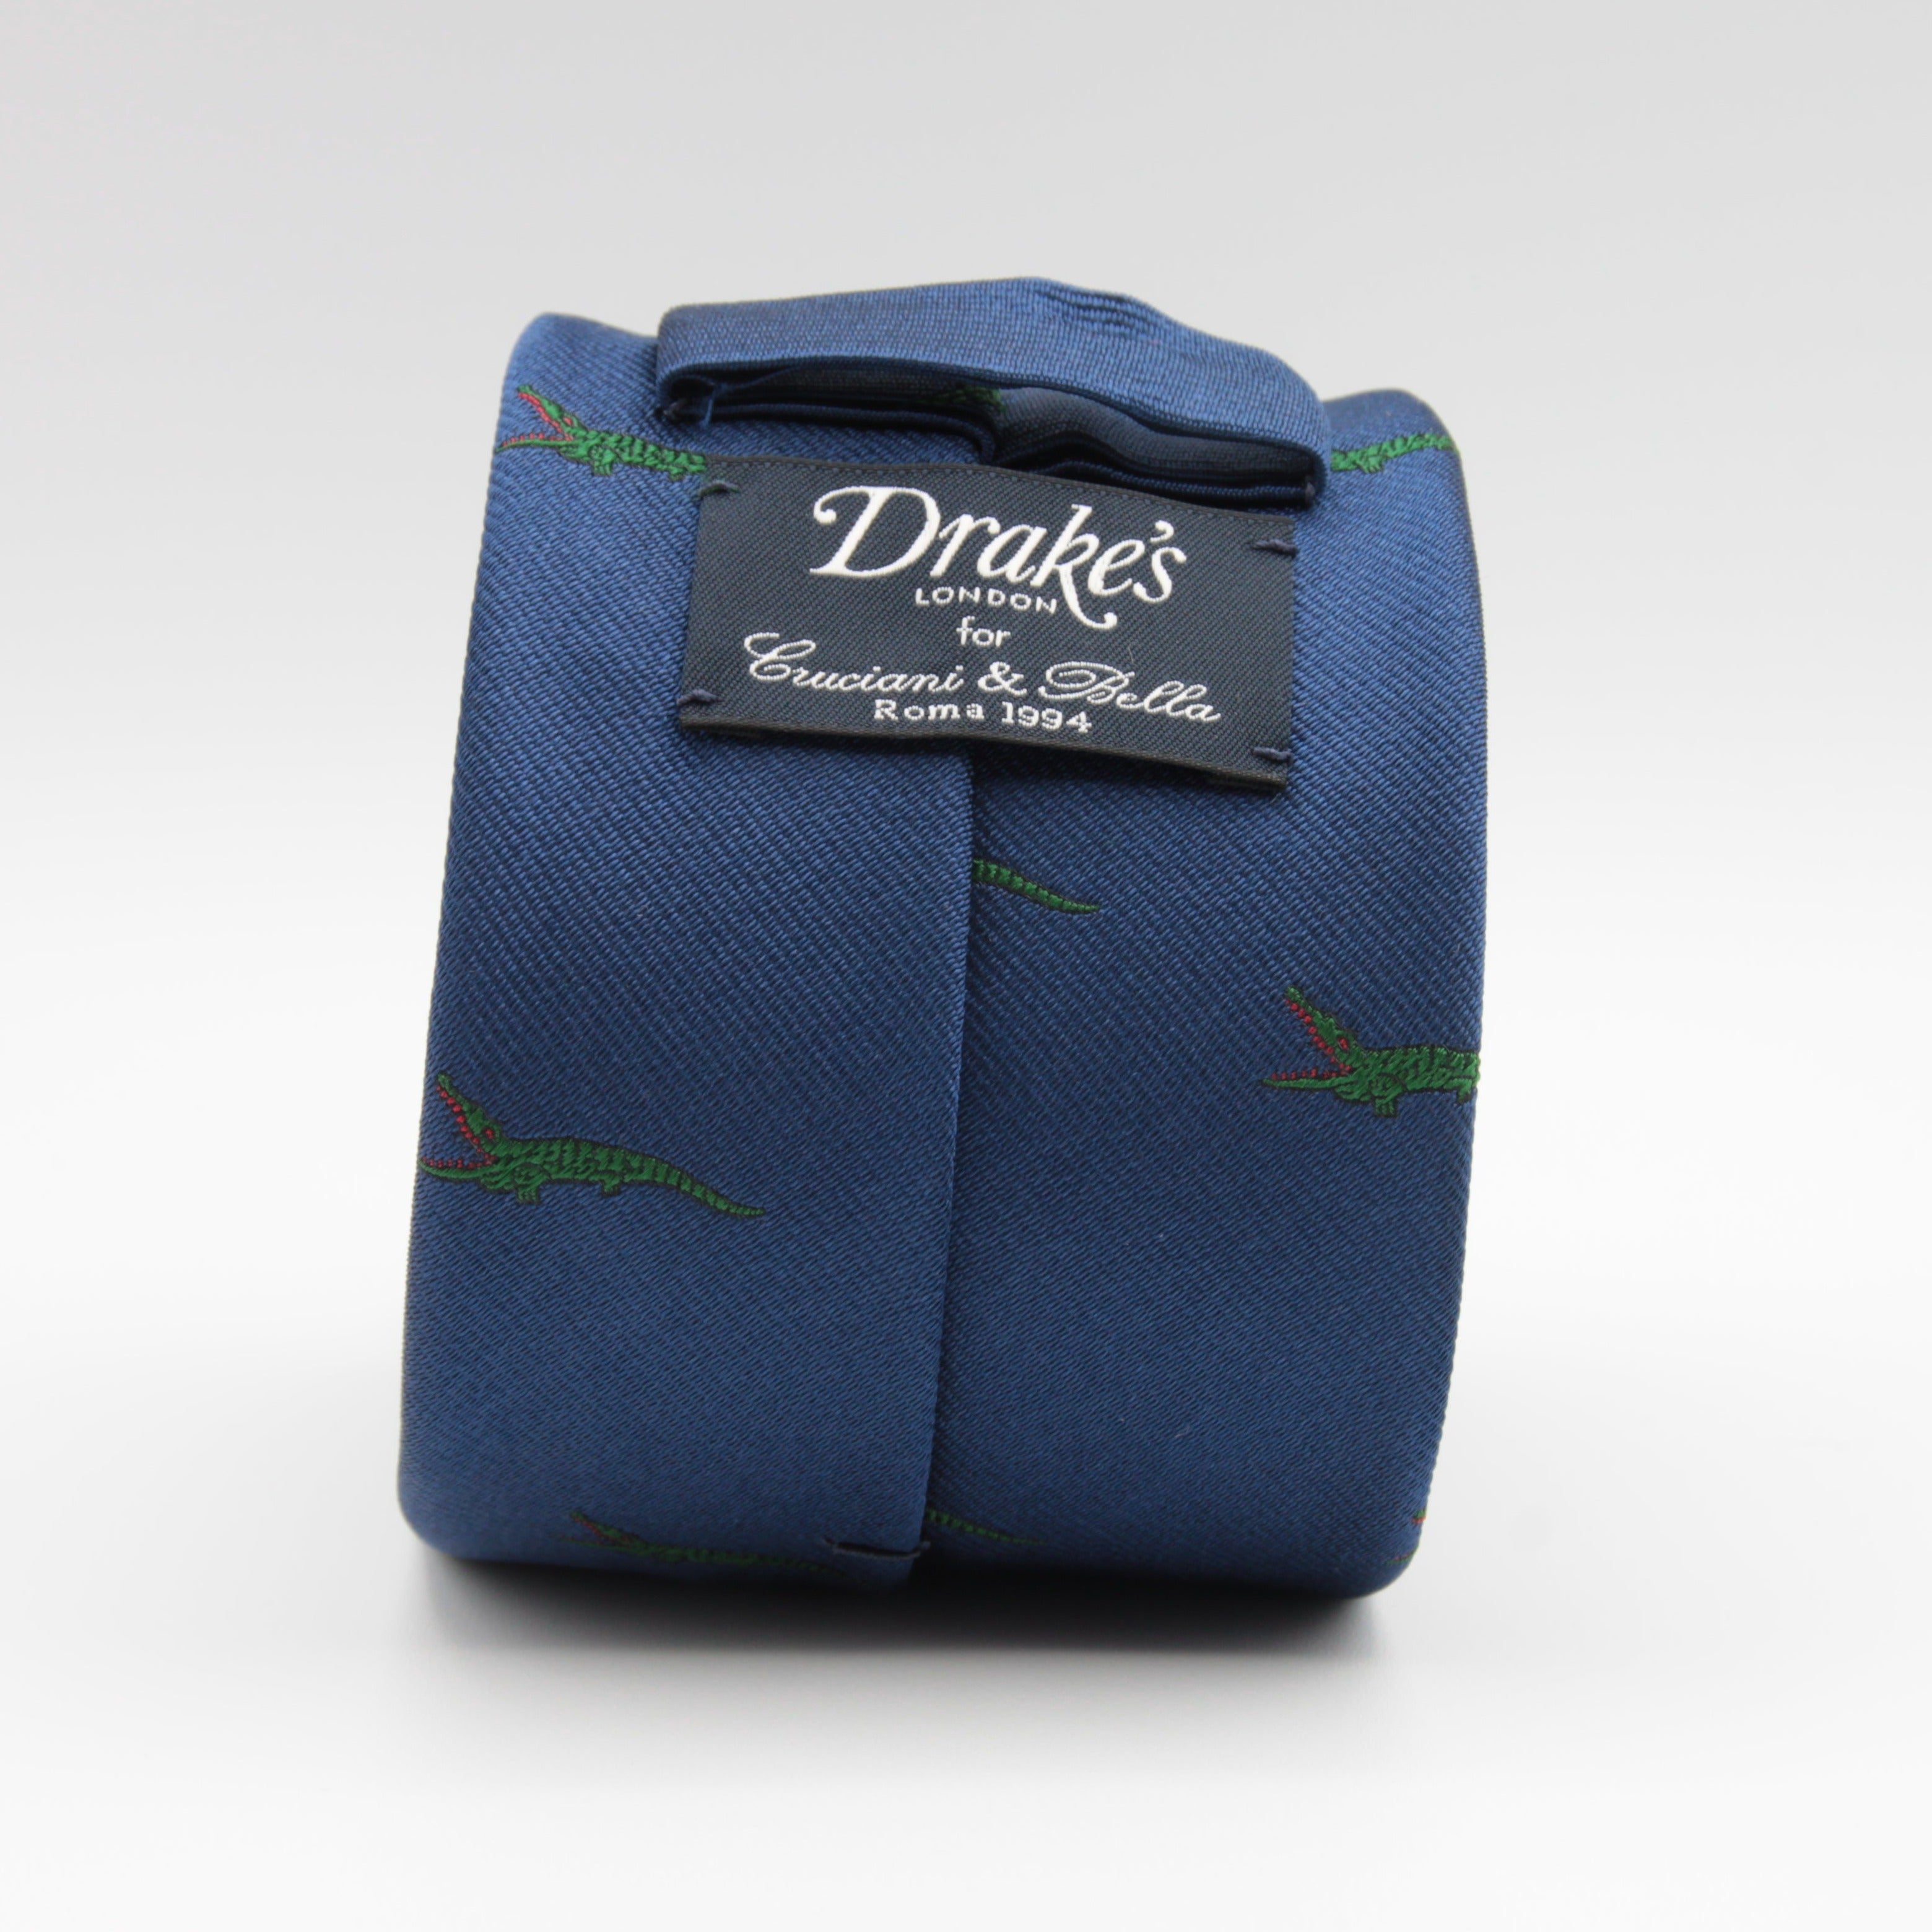 Drake's for Cruciani e Bella 100%  Woven Silk Tipped Blue, Green and Red Crocodile Motif Tie Handmade in London, England 8 cm x 150 cm #3647